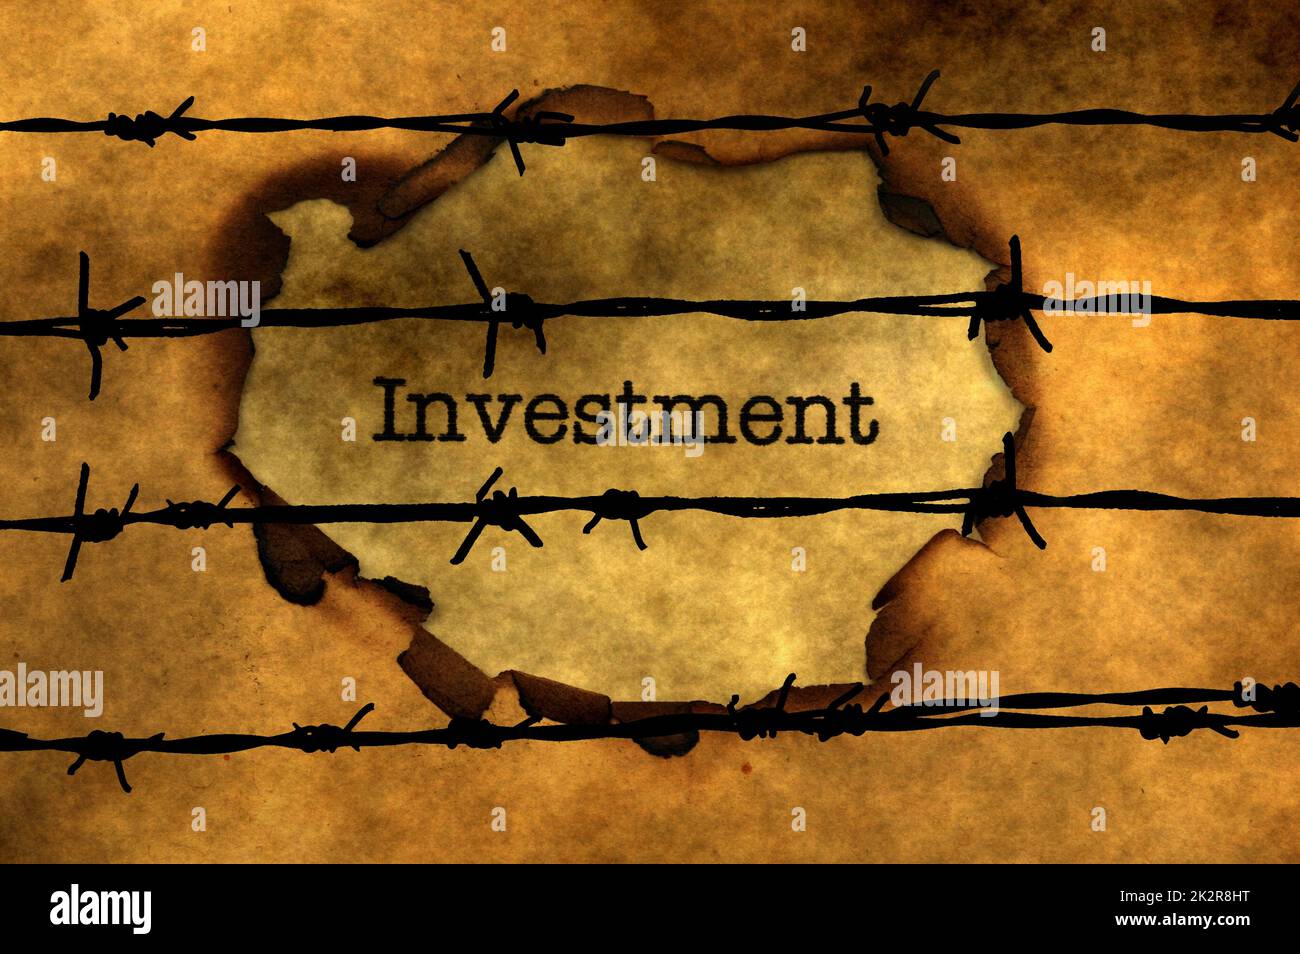 Investment concept against barbwire Stock Photo